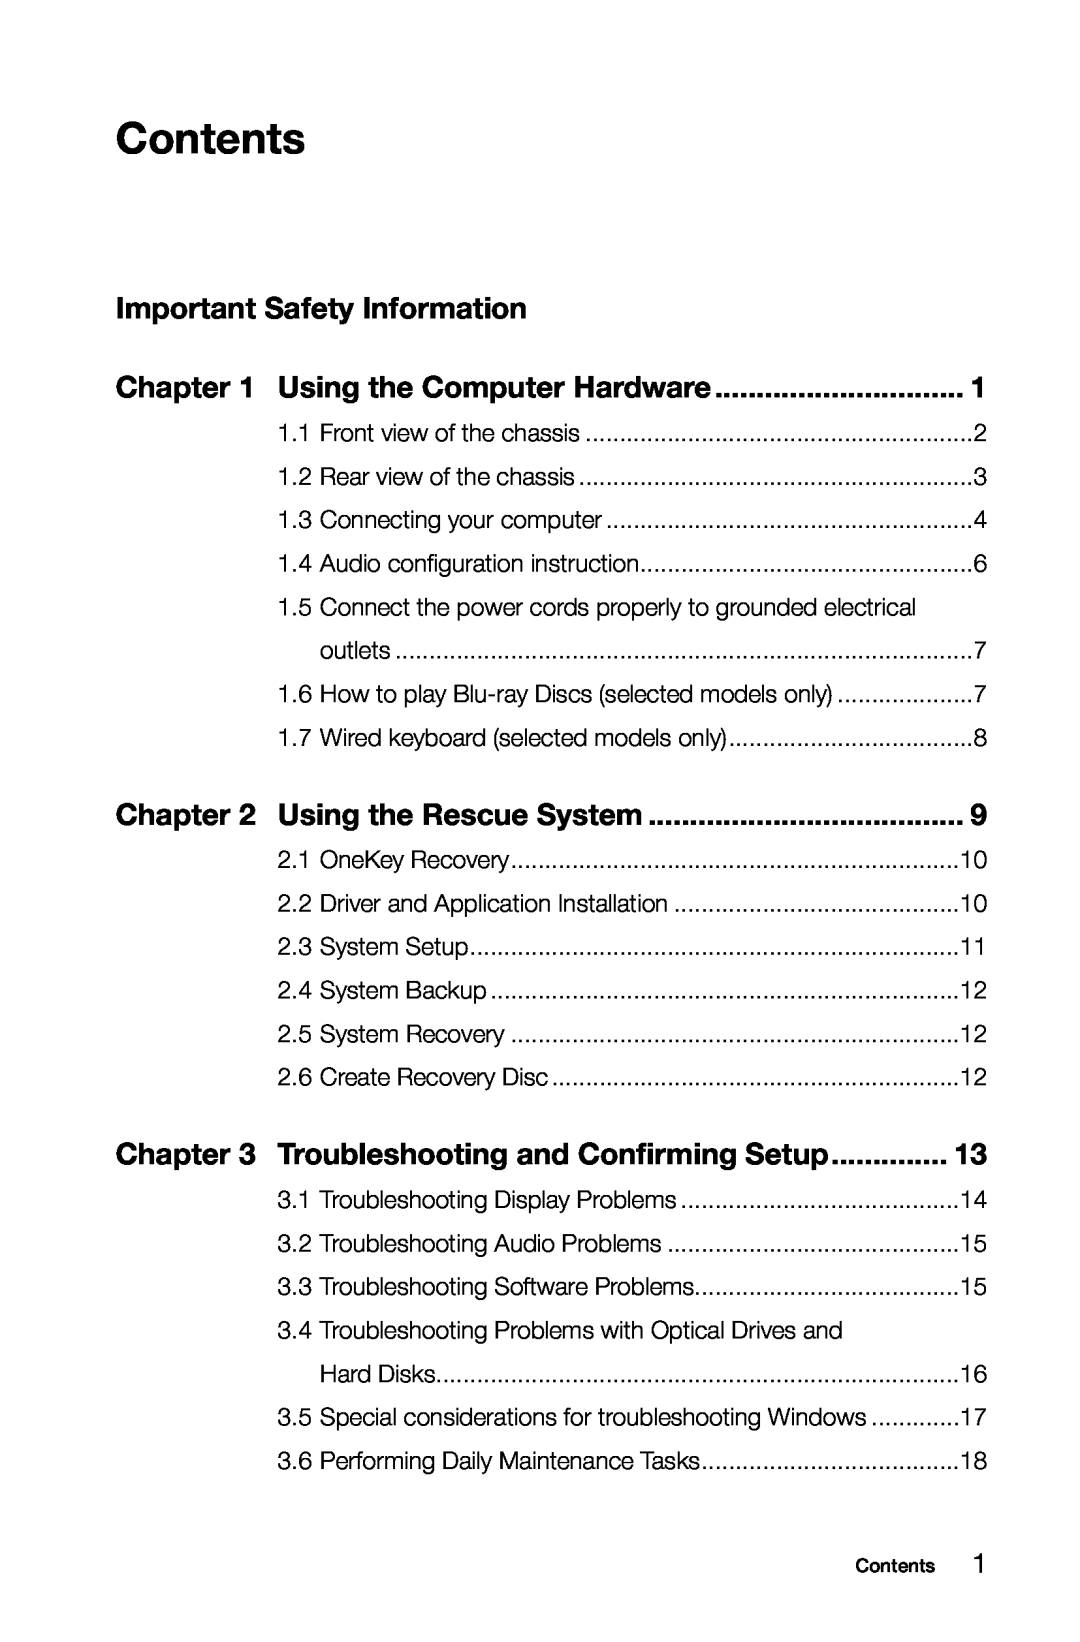 Lenovo H5S manual Contents, Important Safety Information, Using the Rescue System, Troubleshooting and Confirming Setup 